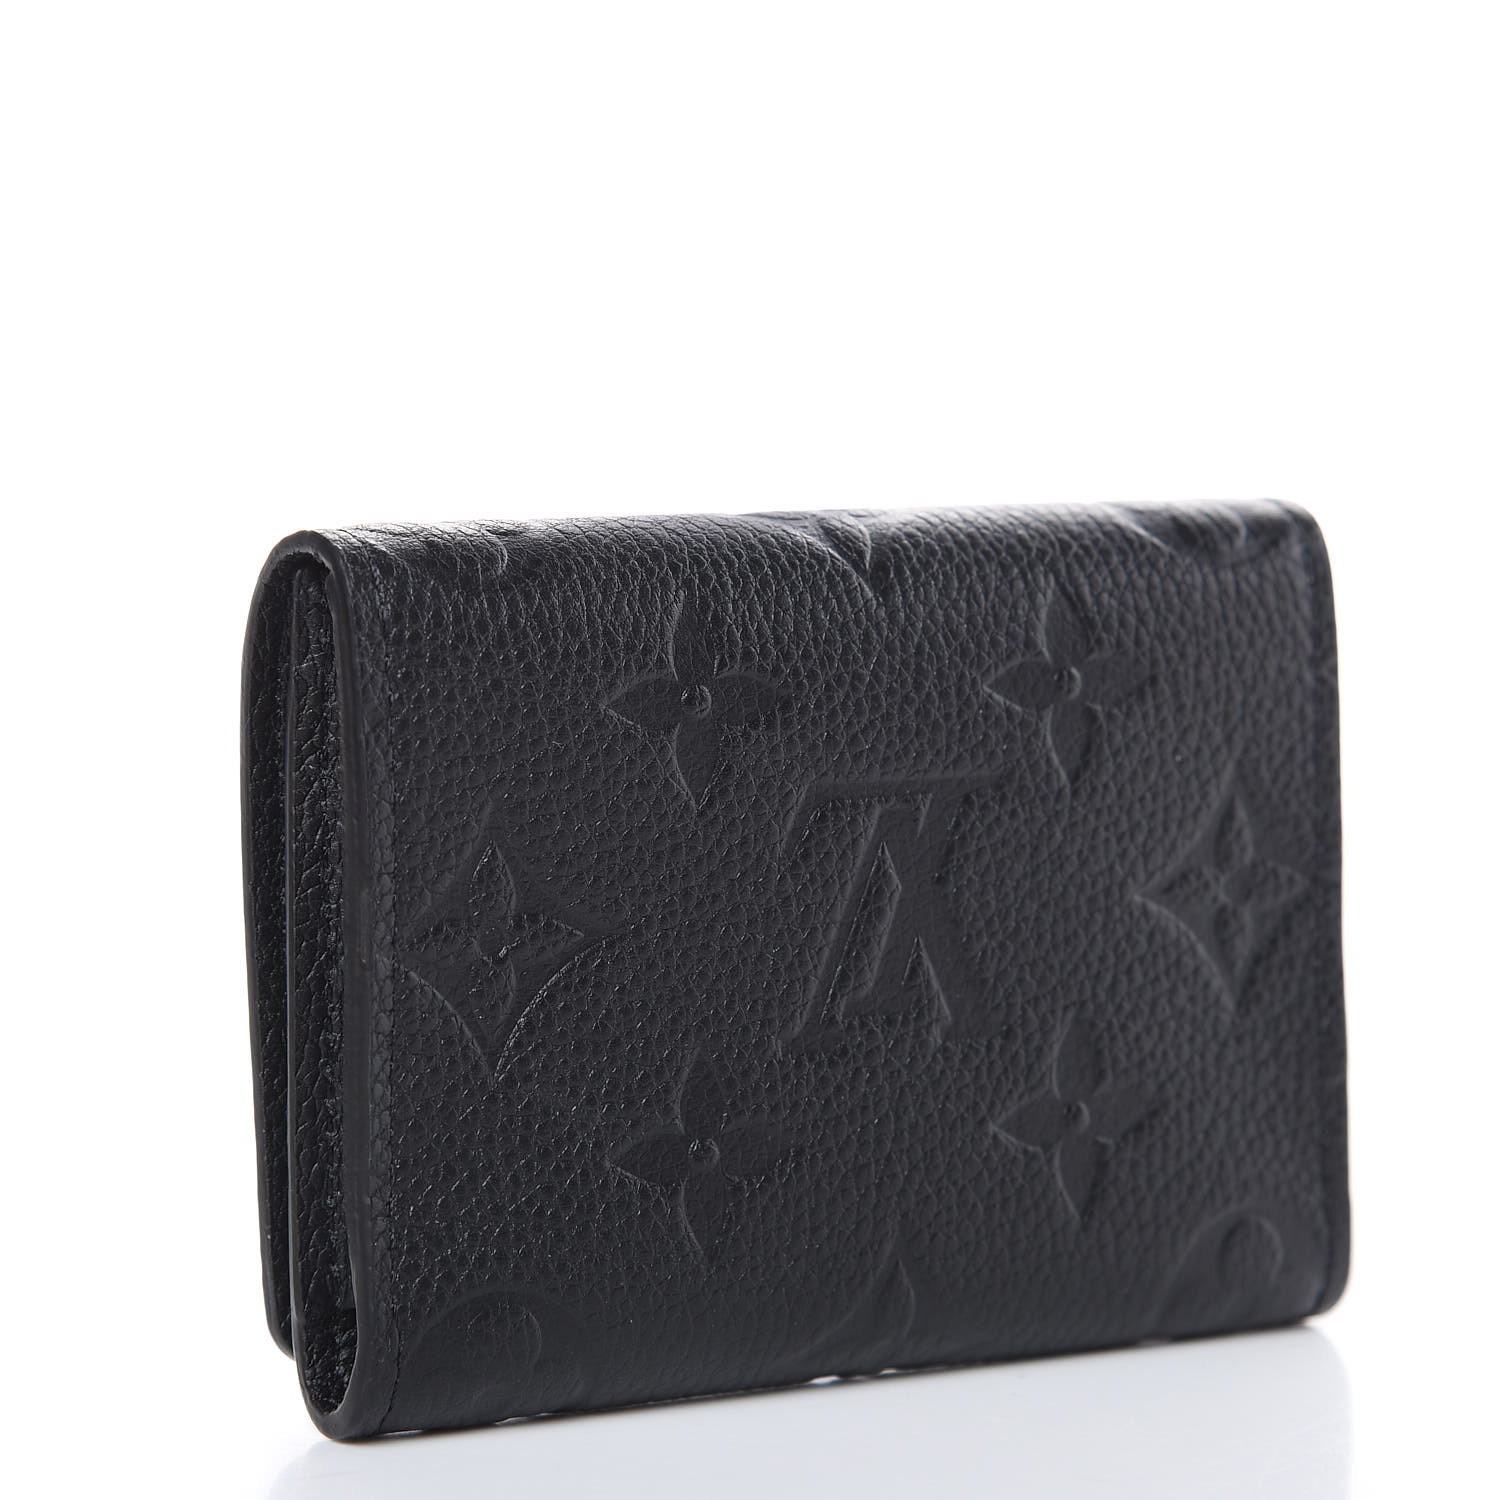 Business Card Holder Monogram Empreinte Leather - Small Leather